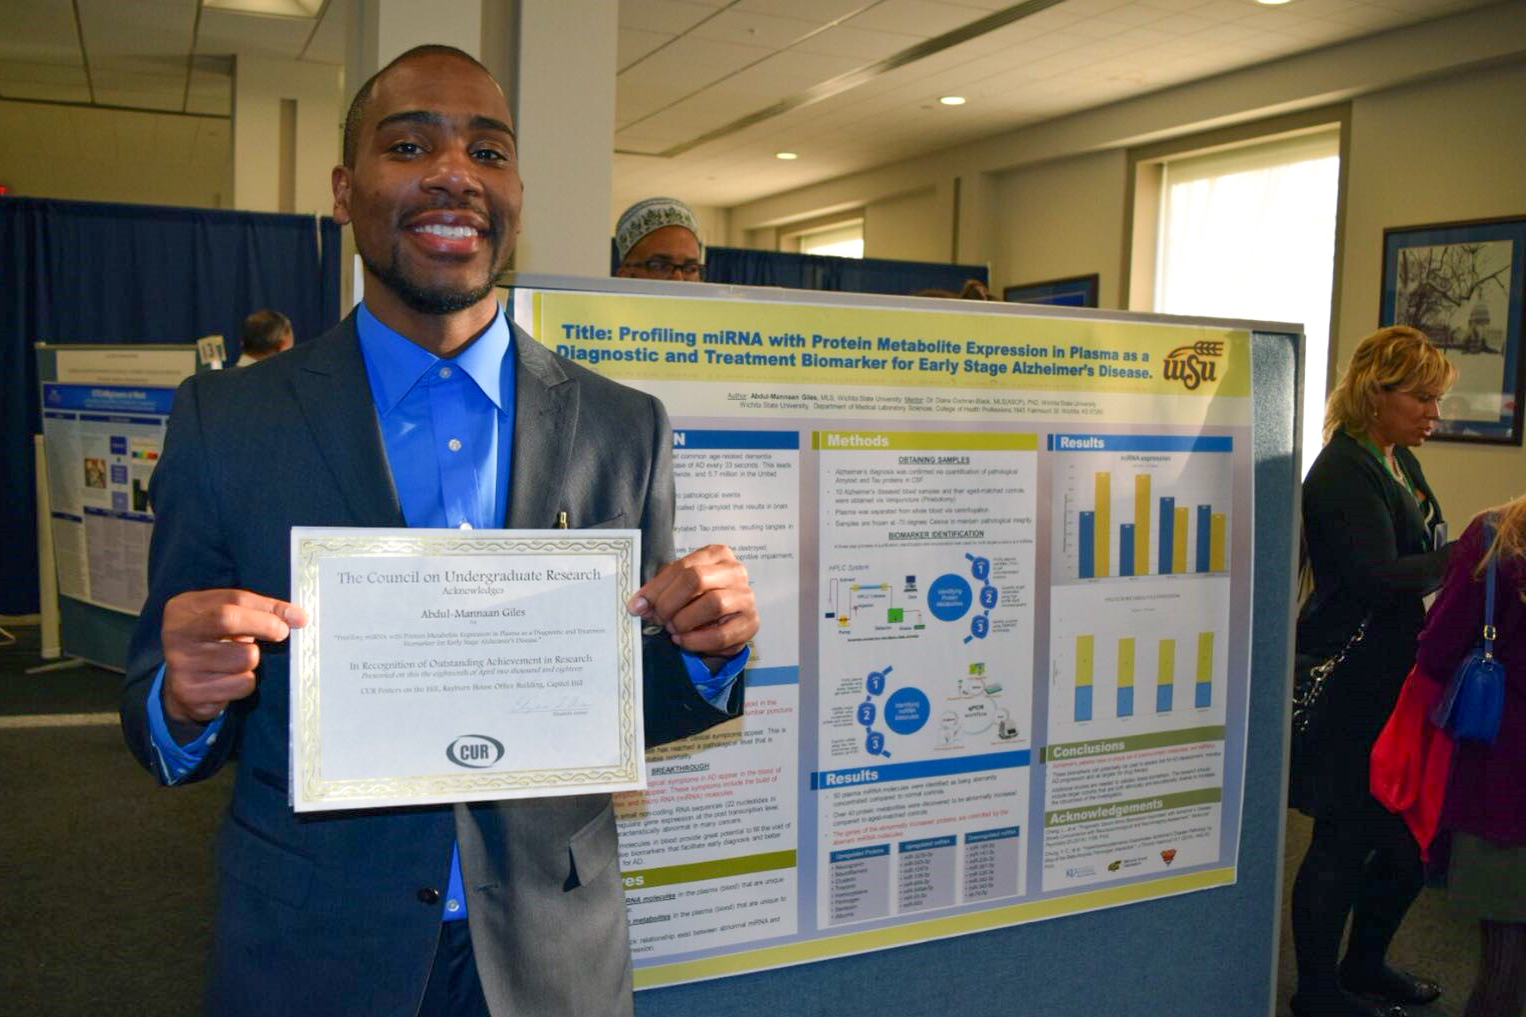 Abdul-Mannaan Giles was invited to present his Alzheimer's research projects at Harvard University and on Capitol Hill., Abdul-Mannaan Giles was invited to present his Alzheimer's research projects at Harvard University and on Capitol Hill.,